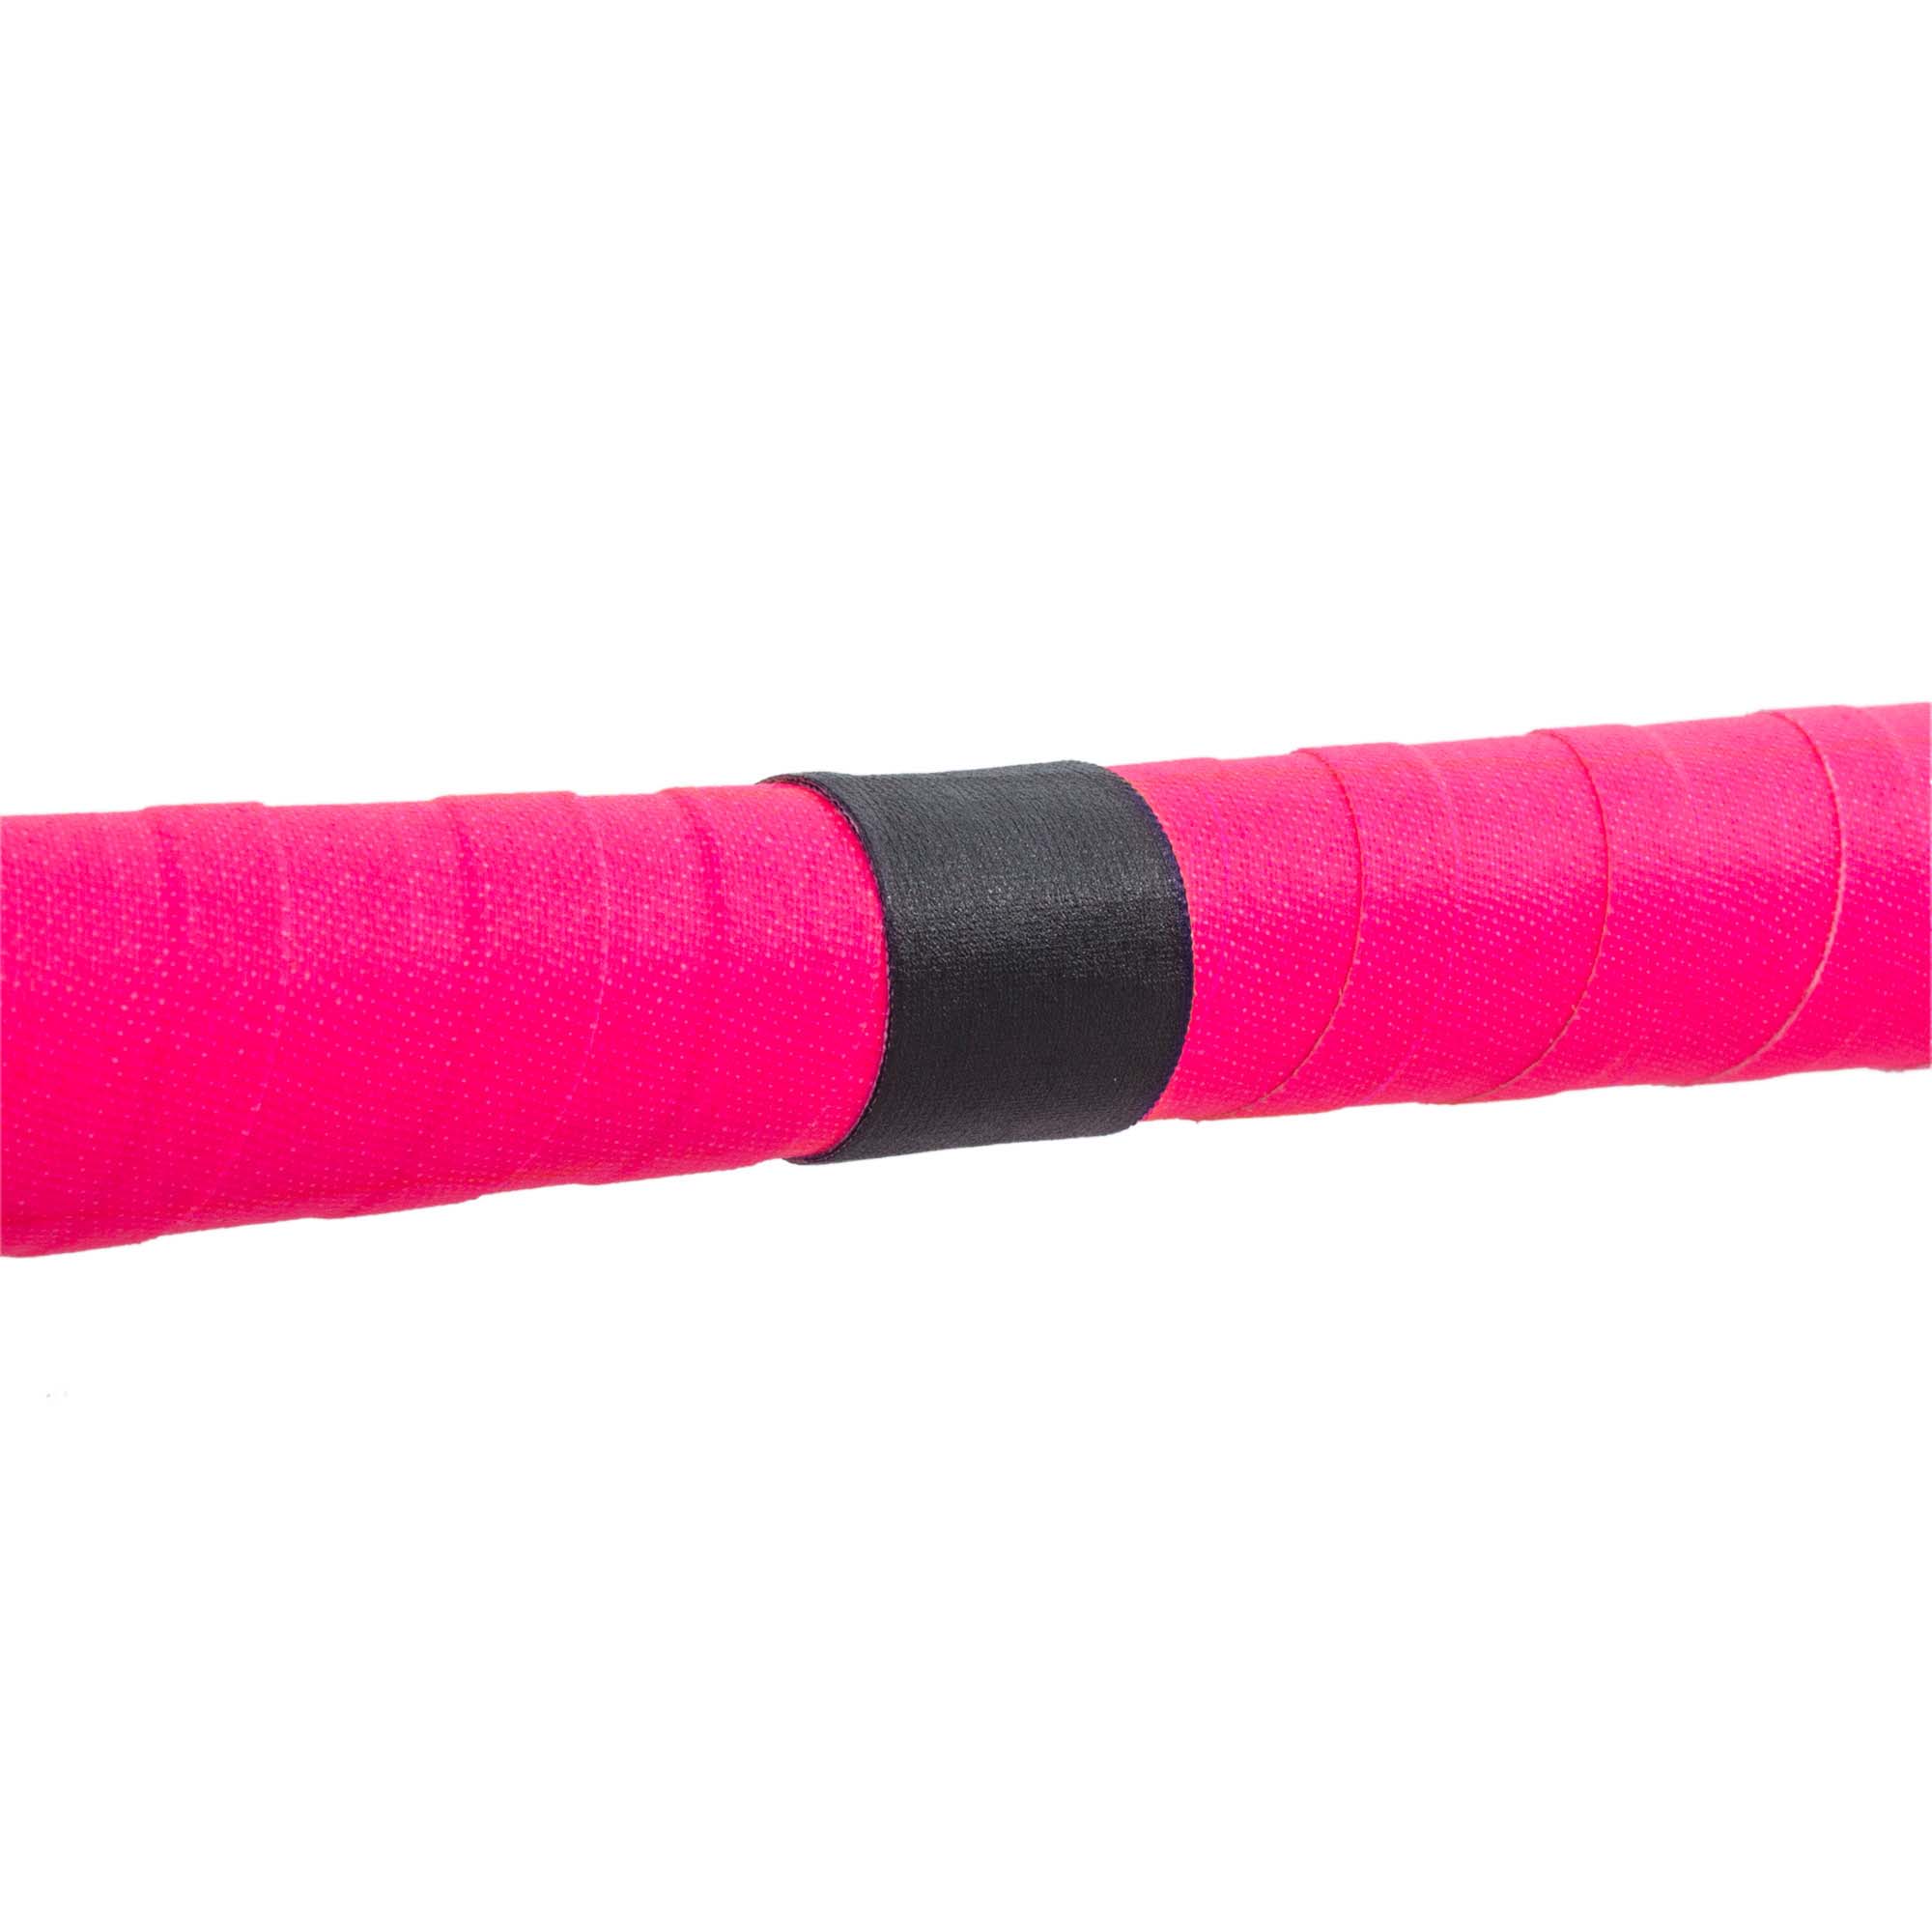 A close up of the centre of the pink devilstick.